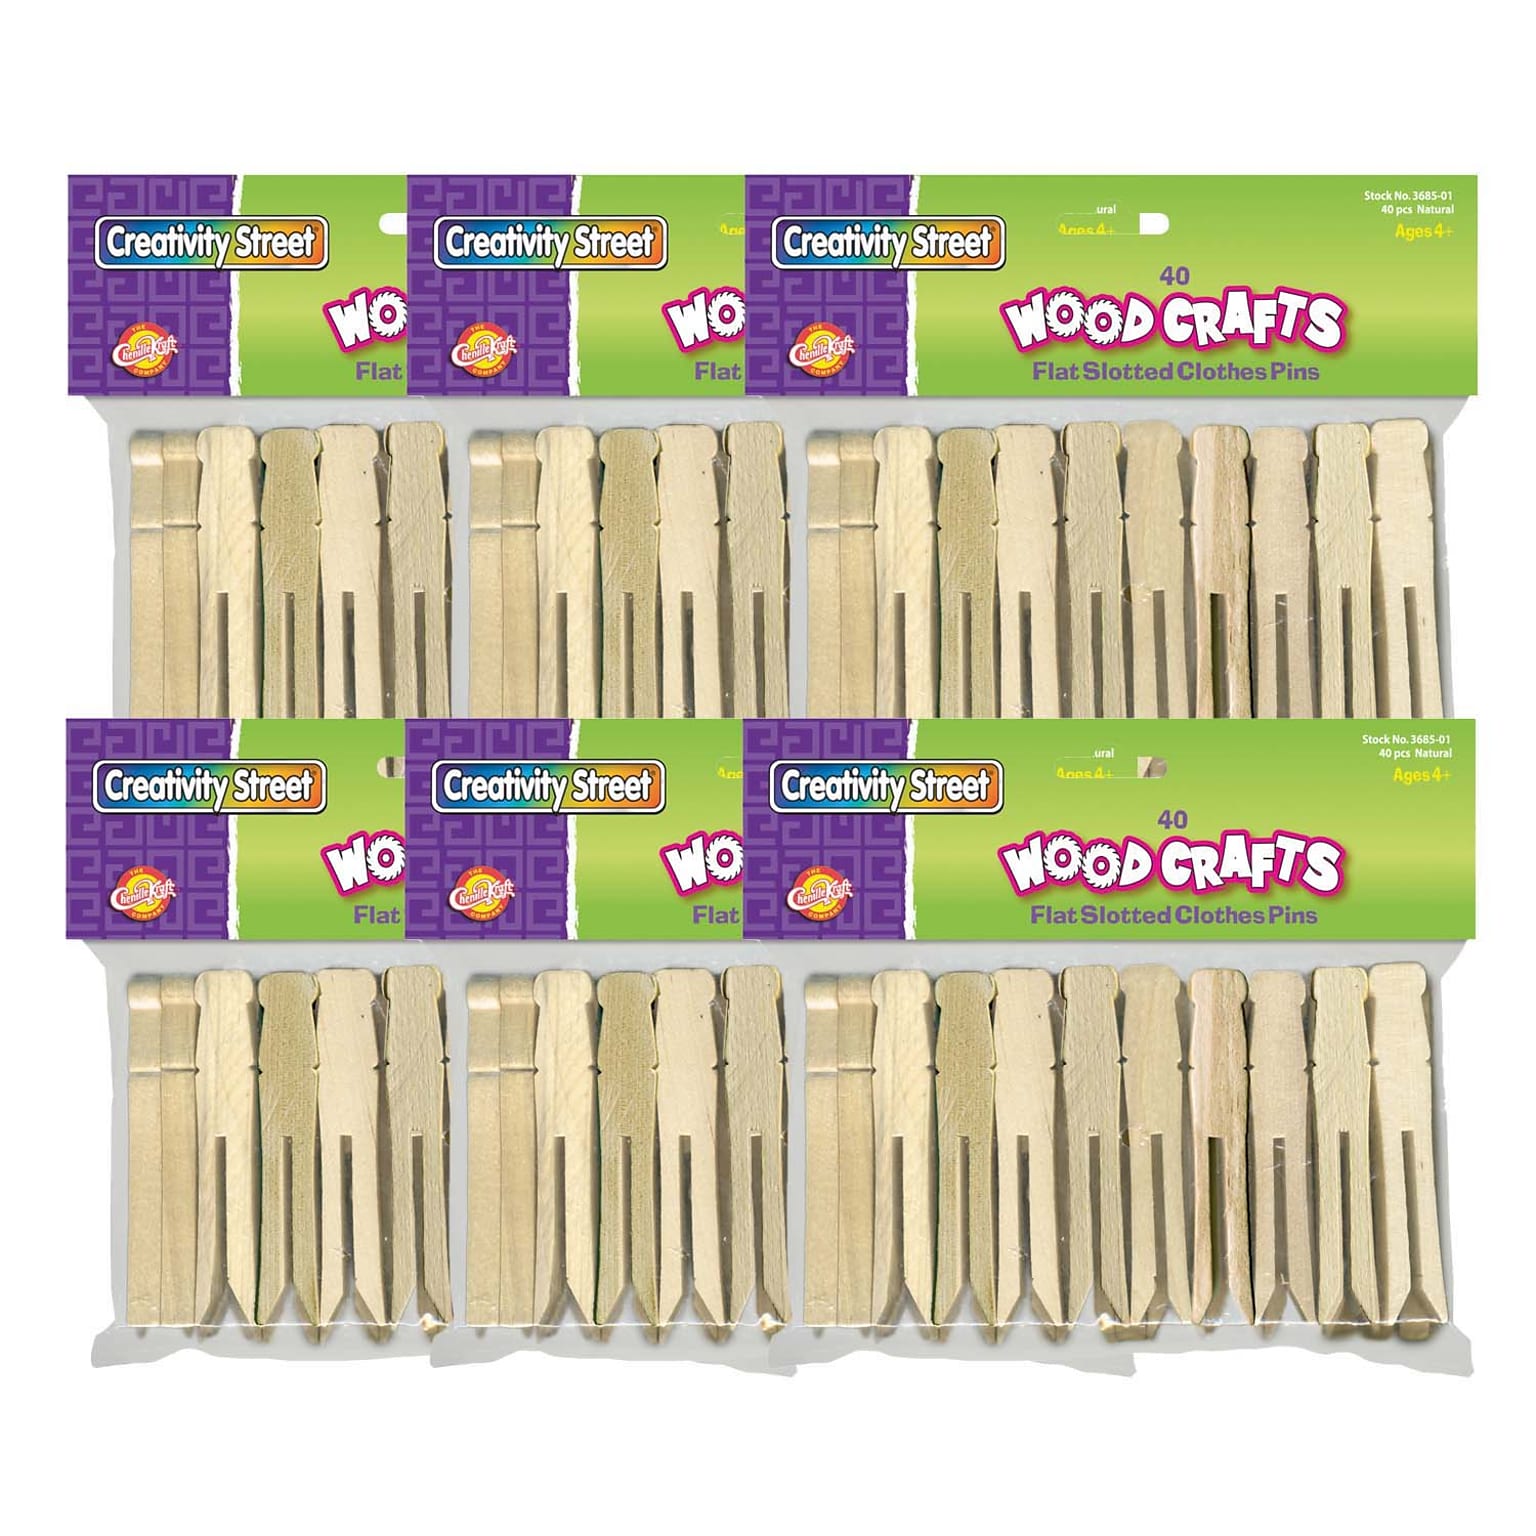 Creativity Street® Large, 3.75, Flat Slotted Clothespins, Natural, 40 Per Pack, 6 Packs (CK-368501-6)